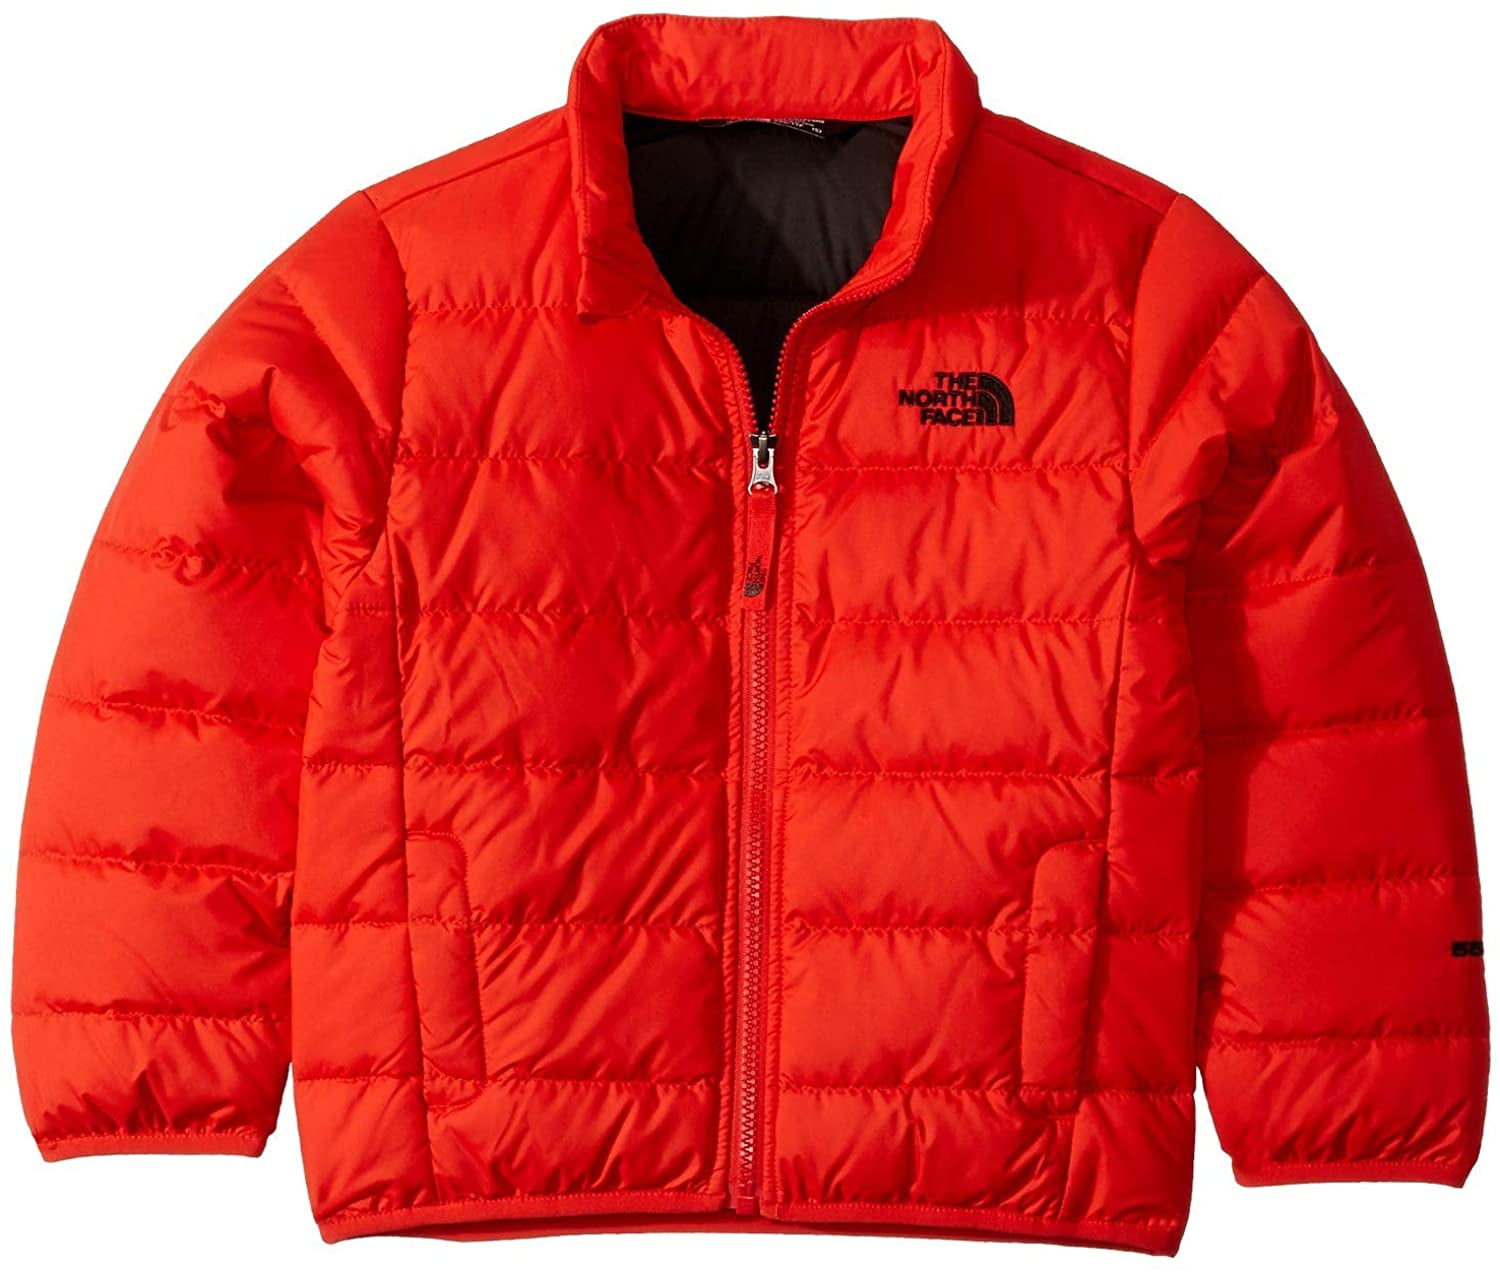 north face boys size chart